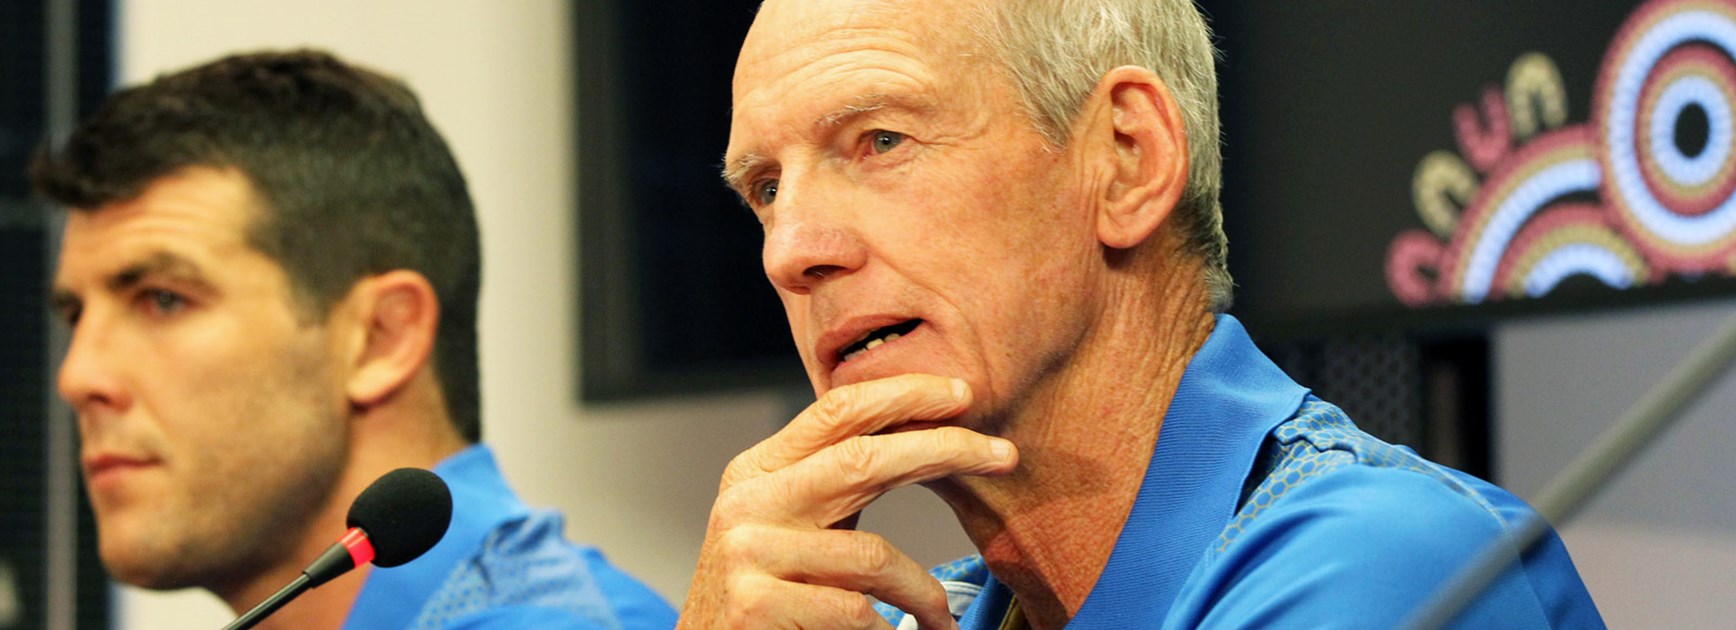 World All Stars coach Wayne Bennett at the announcement of the 2016 All Stars squads.